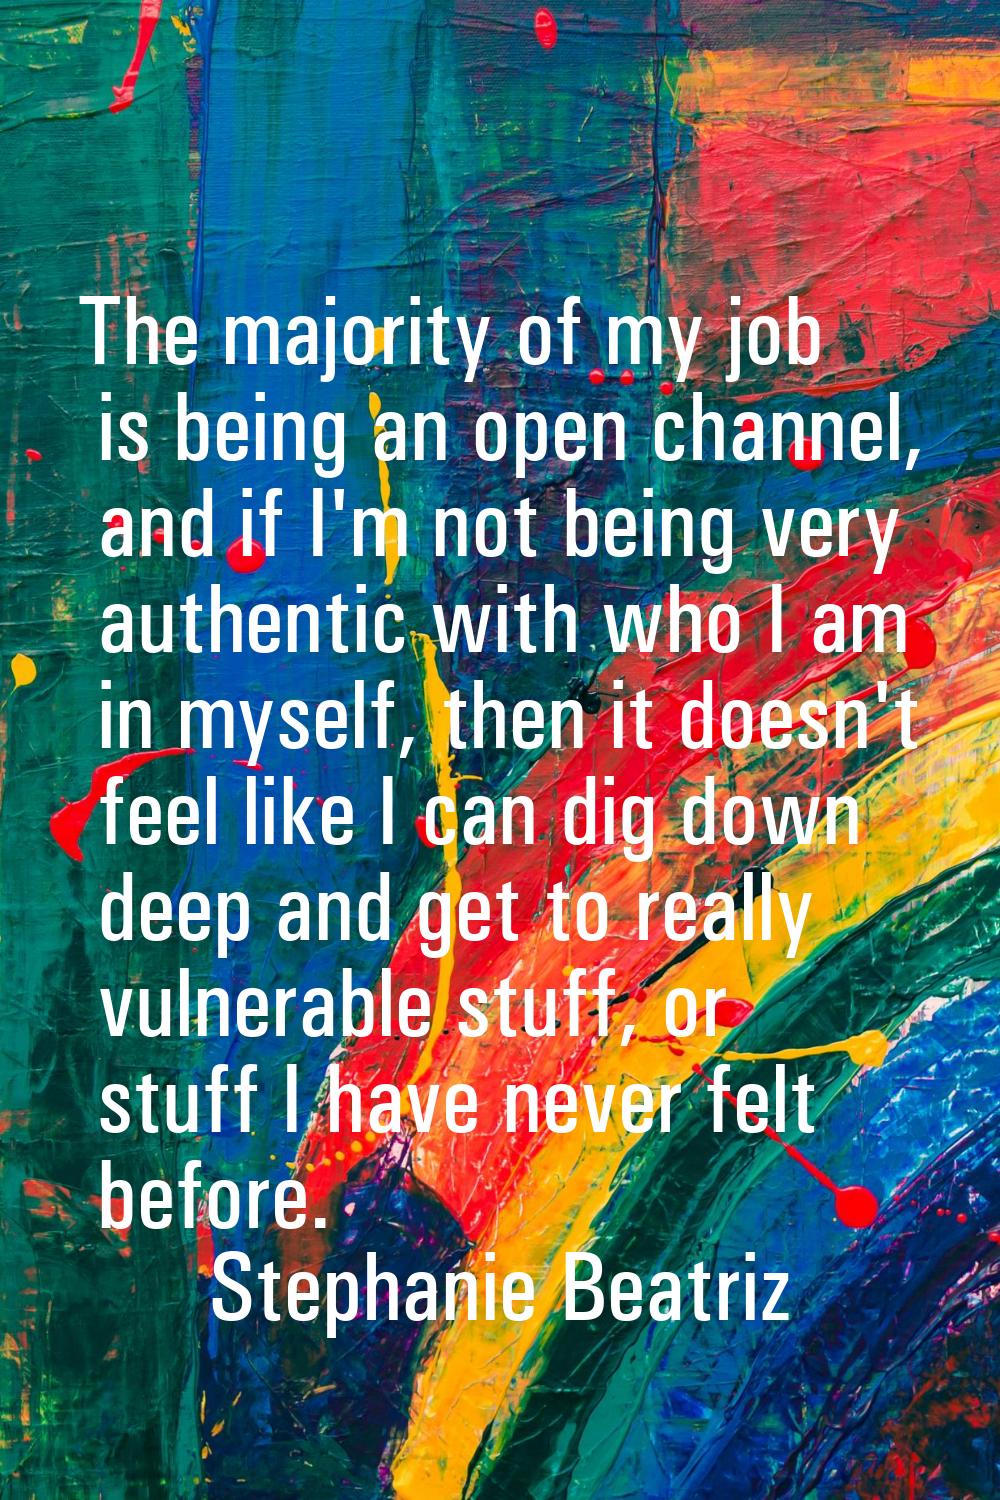 The majority of my job is being an open channel, and if I'm not being very authentic with who I am 